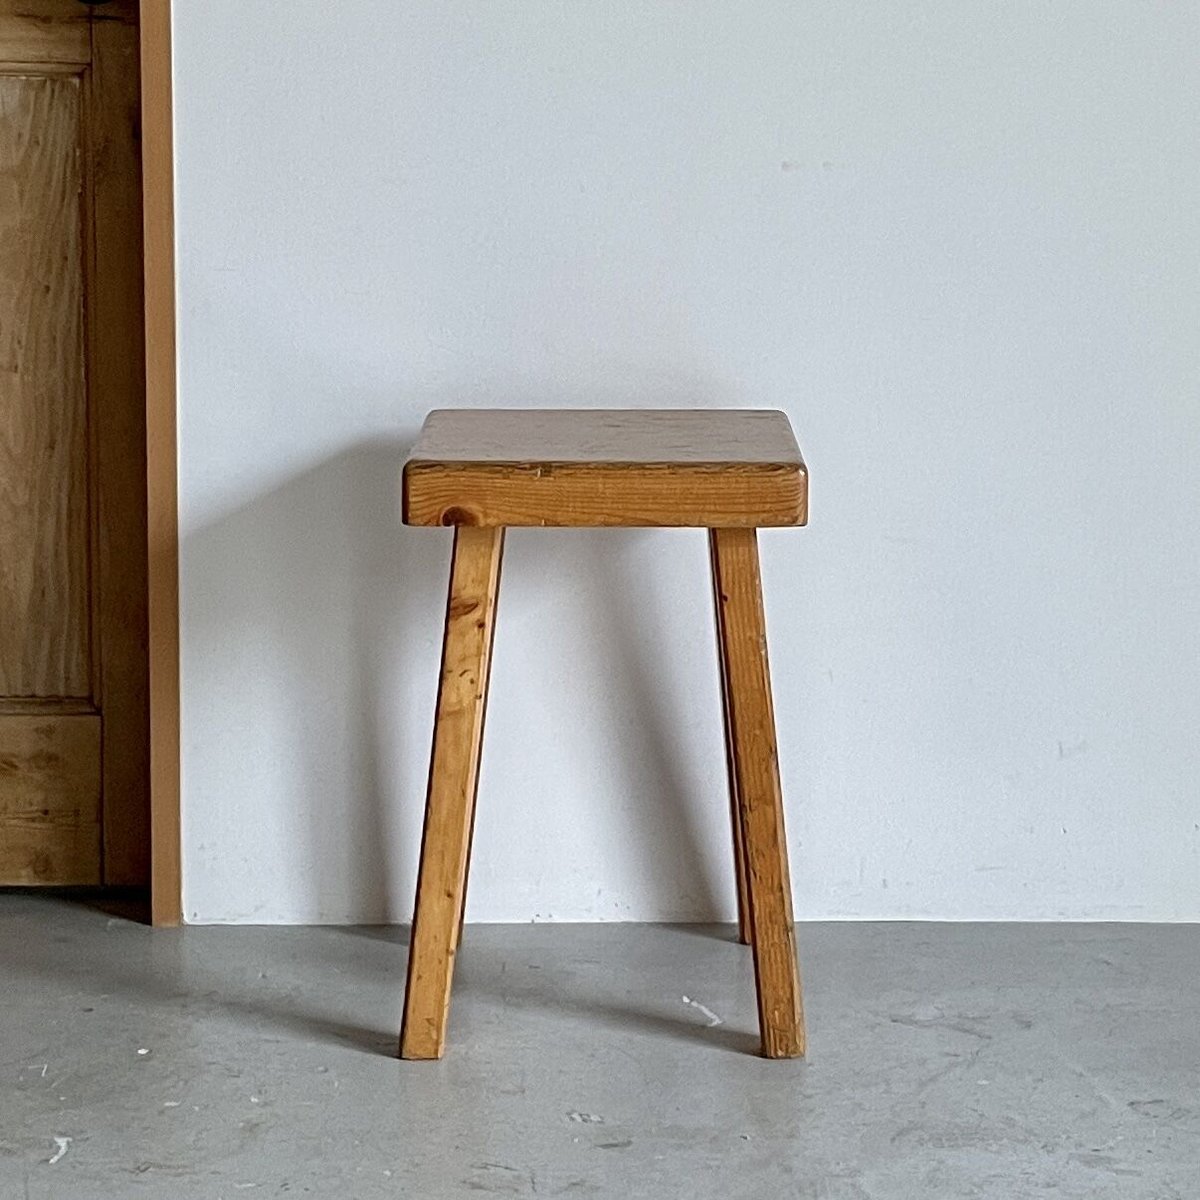 Square Seat Stool for Les arcs-4 / Charlotte Perriand / France, c1980